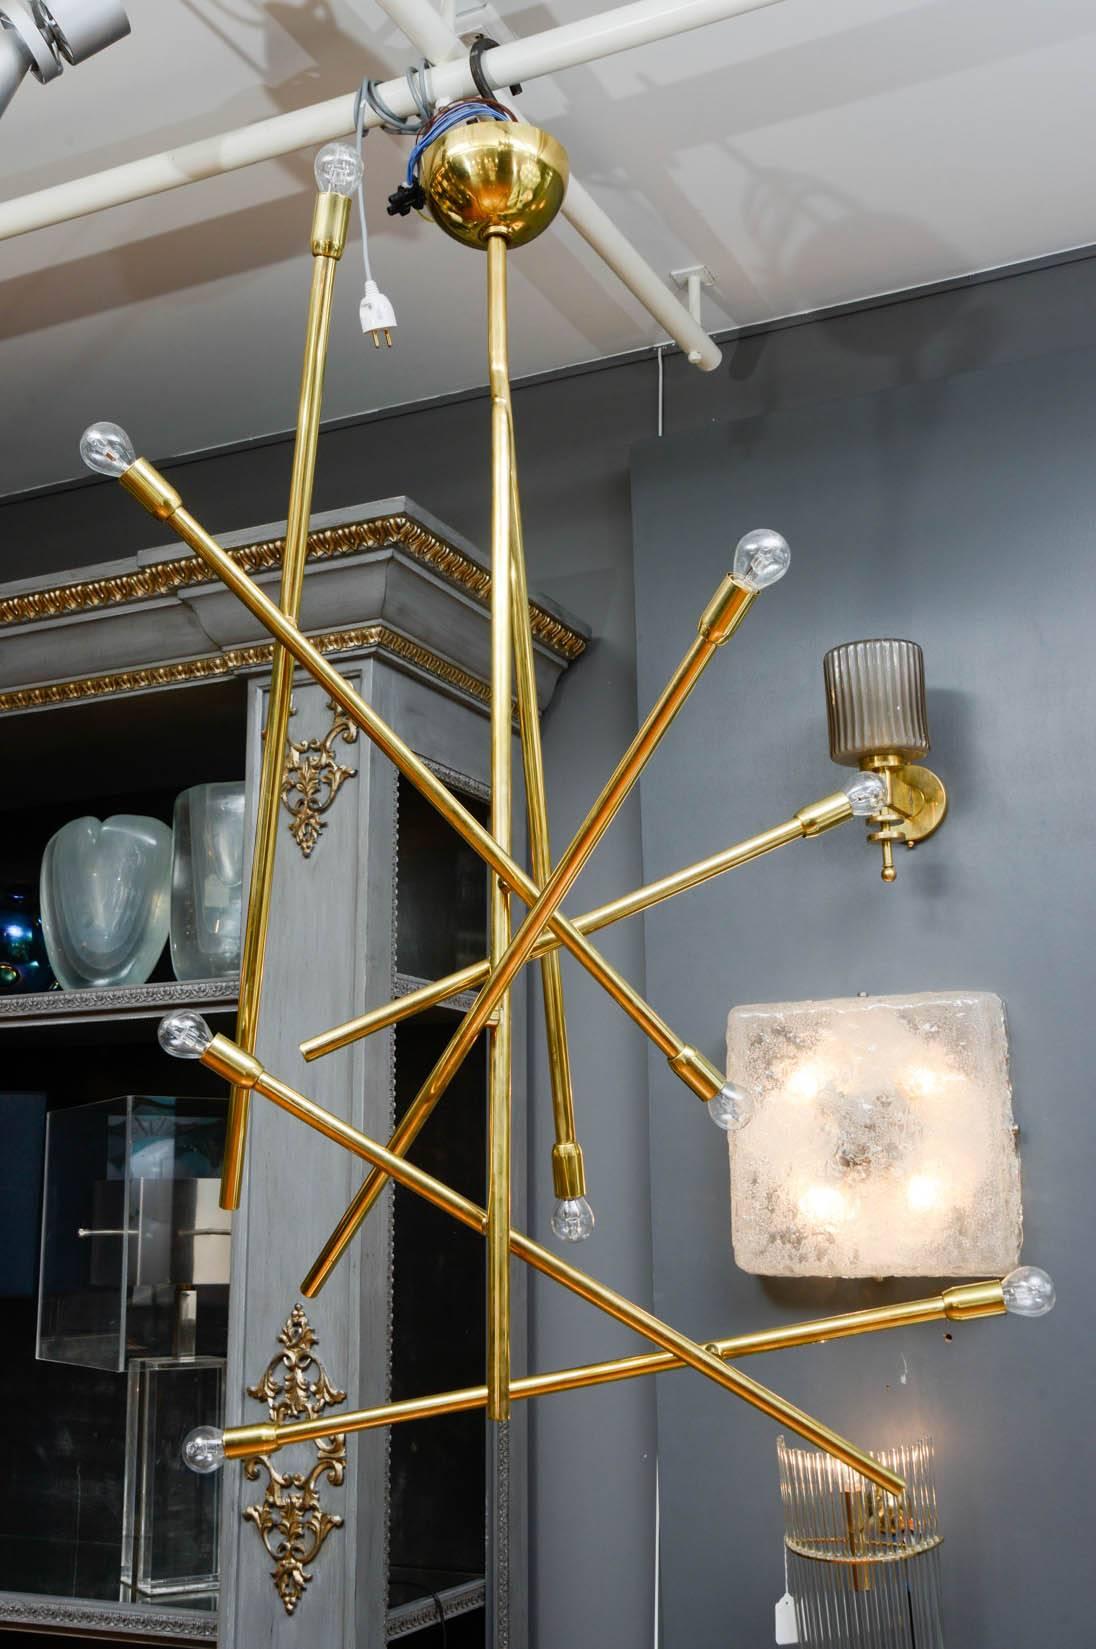 Brass chandelier made of a central stem and eight arms of lights giving an asymmetric overall look.